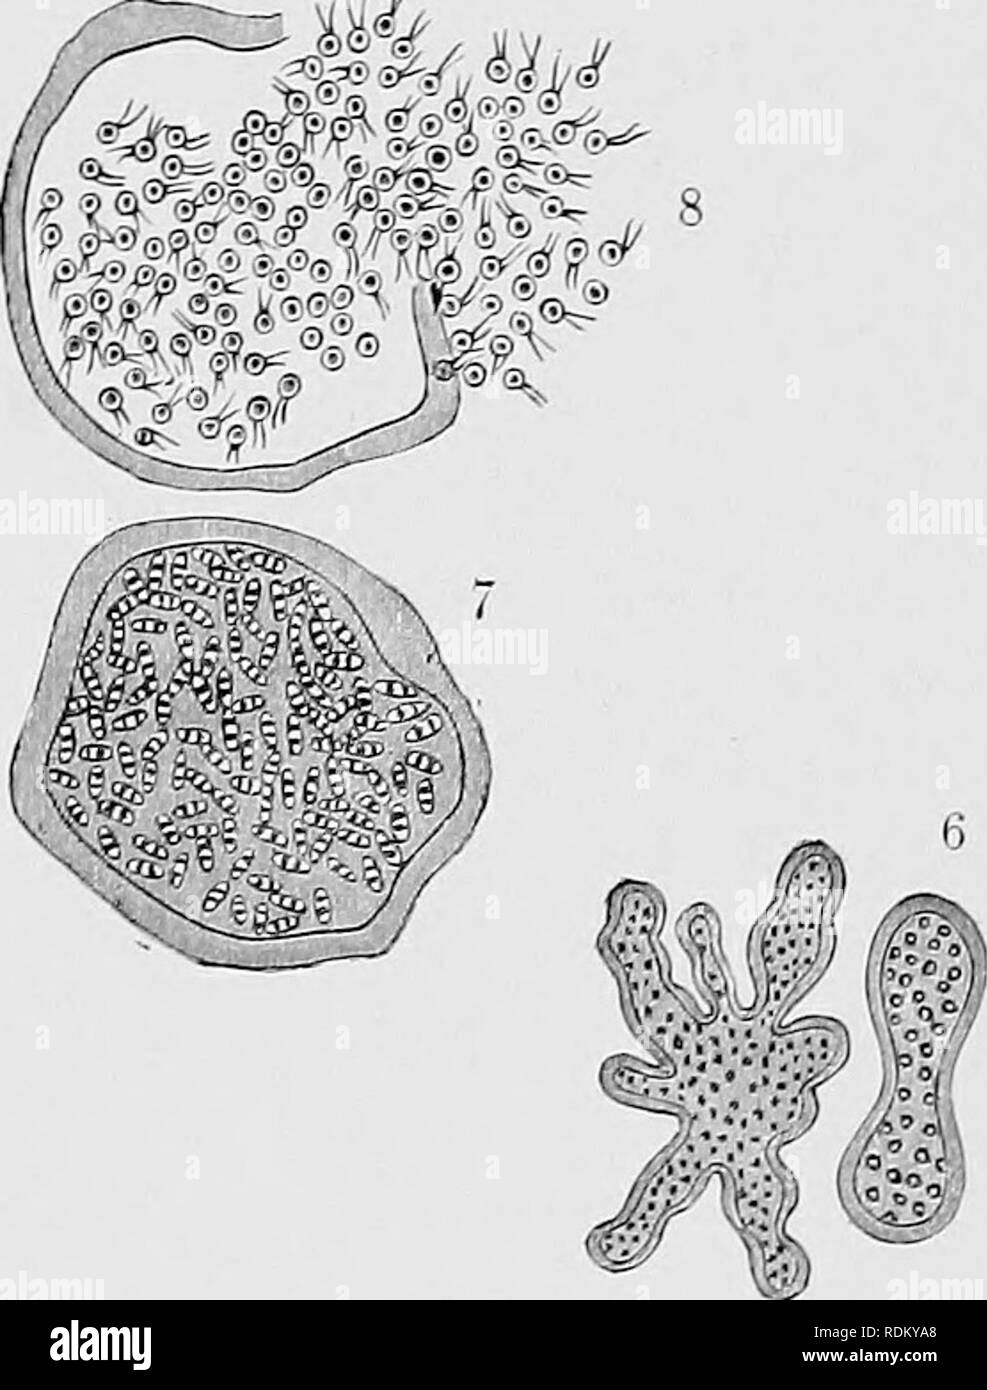 . The Cambridge natural history. Zoology. Fig. 9.—Trichosphaerium sieboldii. 1, Adult of ''A&quot; form; 2, its multiplication by fission and gemmation ; 3, resolntion into 1-nucleate amoeboid zoospores ; 4, development (from zoospores of &quot;A&quot;) into &quot;B&quot; form (5); 6, its multiplication by fission and gemmation; 7, its resolution after nuclear bipartition into minute 2-flagellate zoospores or (exogametes); 8, liberation of gametes ; 9, 10, more highly magnified pairing of gametes of different origin; 11, 12, zygote developing into &quot;A&quot; form. (After Schaudinn.) p. 29), Stock Photo